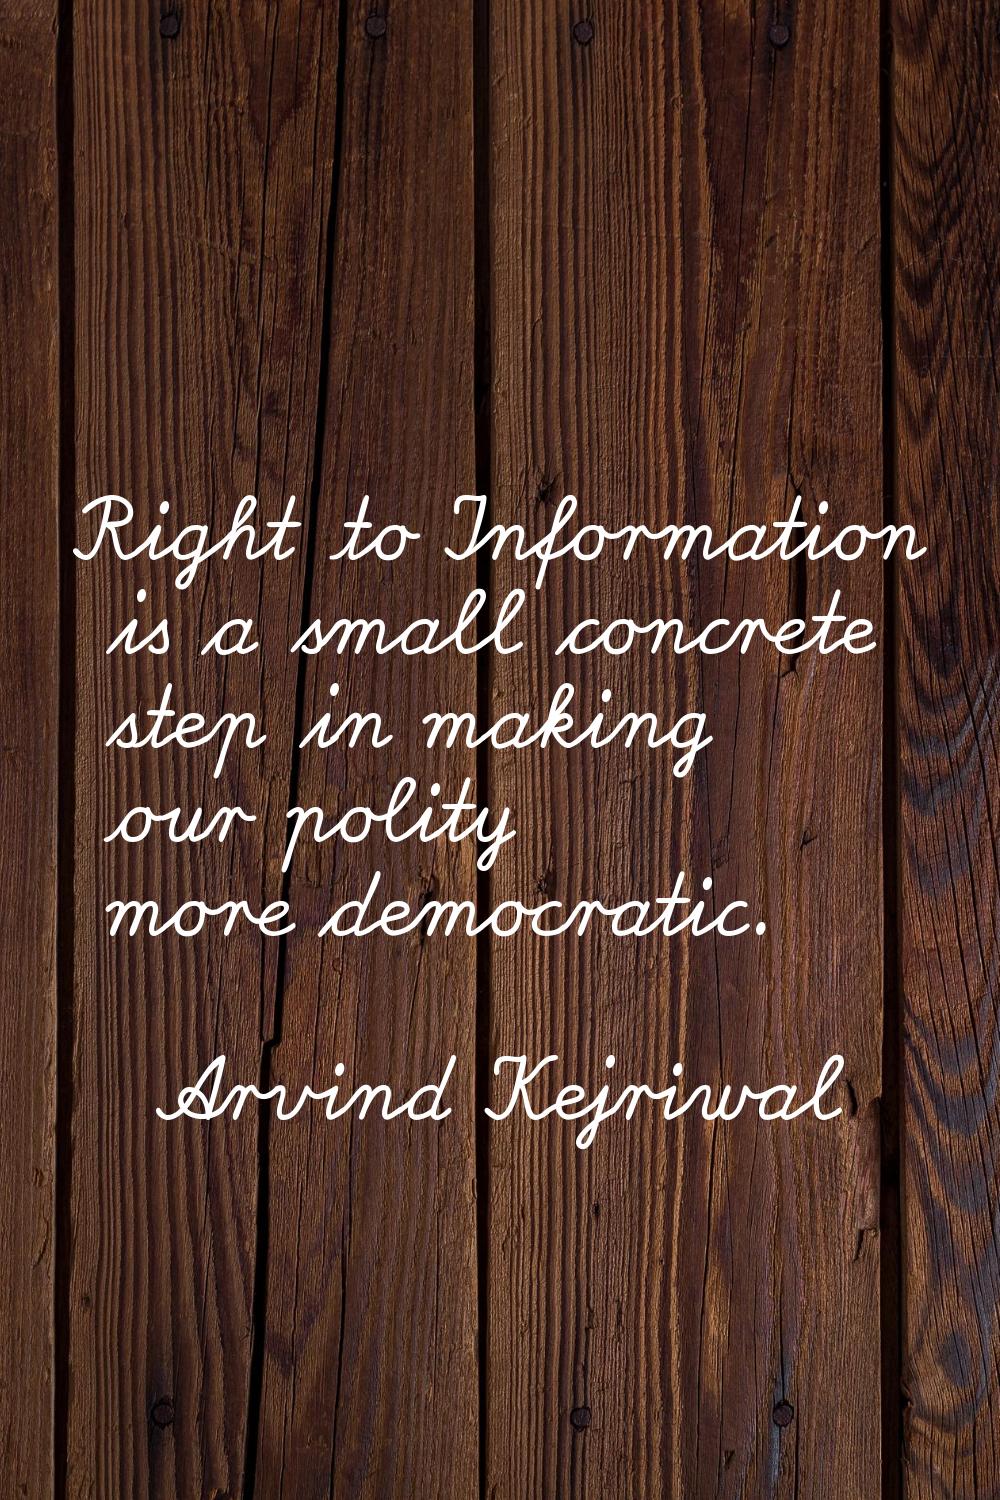 Right to Information is a small concrete step in making our polity more democratic.